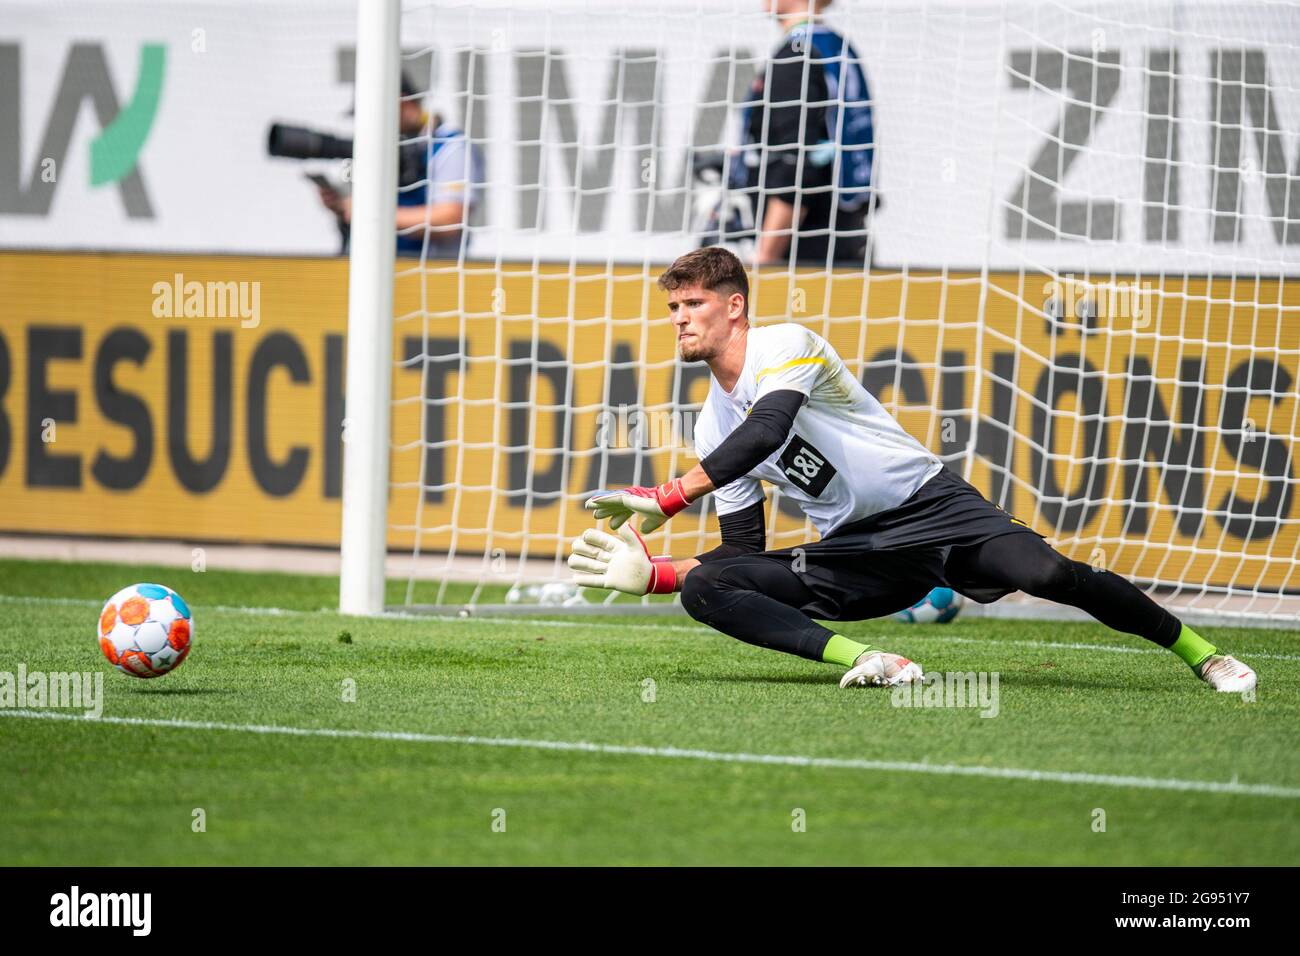 St. Gallen, Switzerland. 24th July, 2021. Football: Test matches, Borussia Dortmund - Athletic Bilbao at Kybunpark. Dortmund goalkeeper Gregor Kobel warming up. Credit: David Inderlied/dpa - IMPORTANT NOTE: In accordance with the regulations of the DFL Deutsche Fußball Liga and/or the DFB Deutscher Fußball-Bund, it is prohibited to use or have used photographs taken in the stadium and/or of the match in the form of sequence pictures and/or video-like photo series./dpa/Alamy Live News Stock Photo